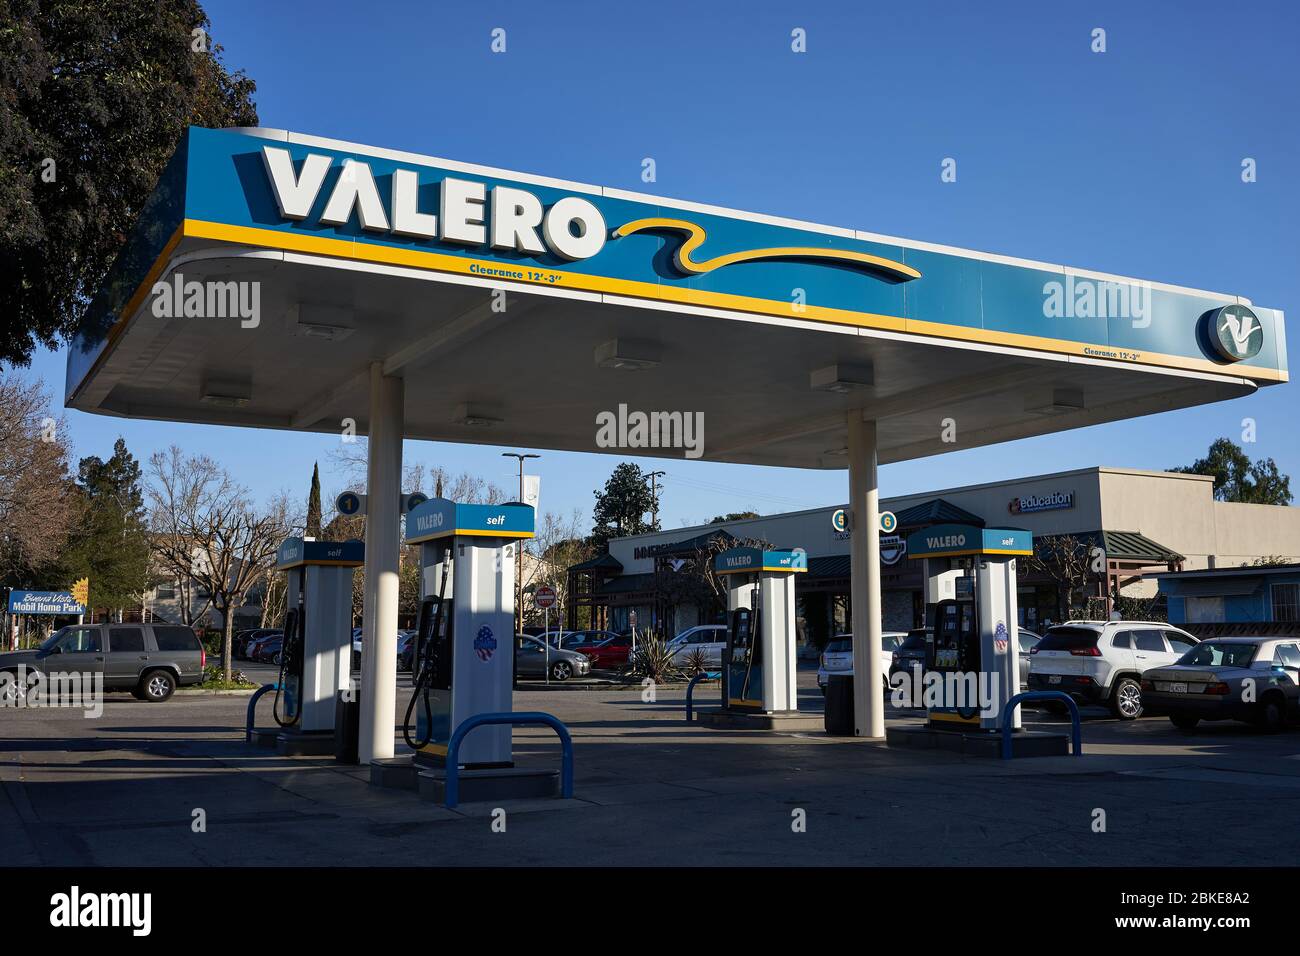 A Valero gas station in Mountain View, California, seen on Tuesday, Feb 11, 2020. Stock Photo